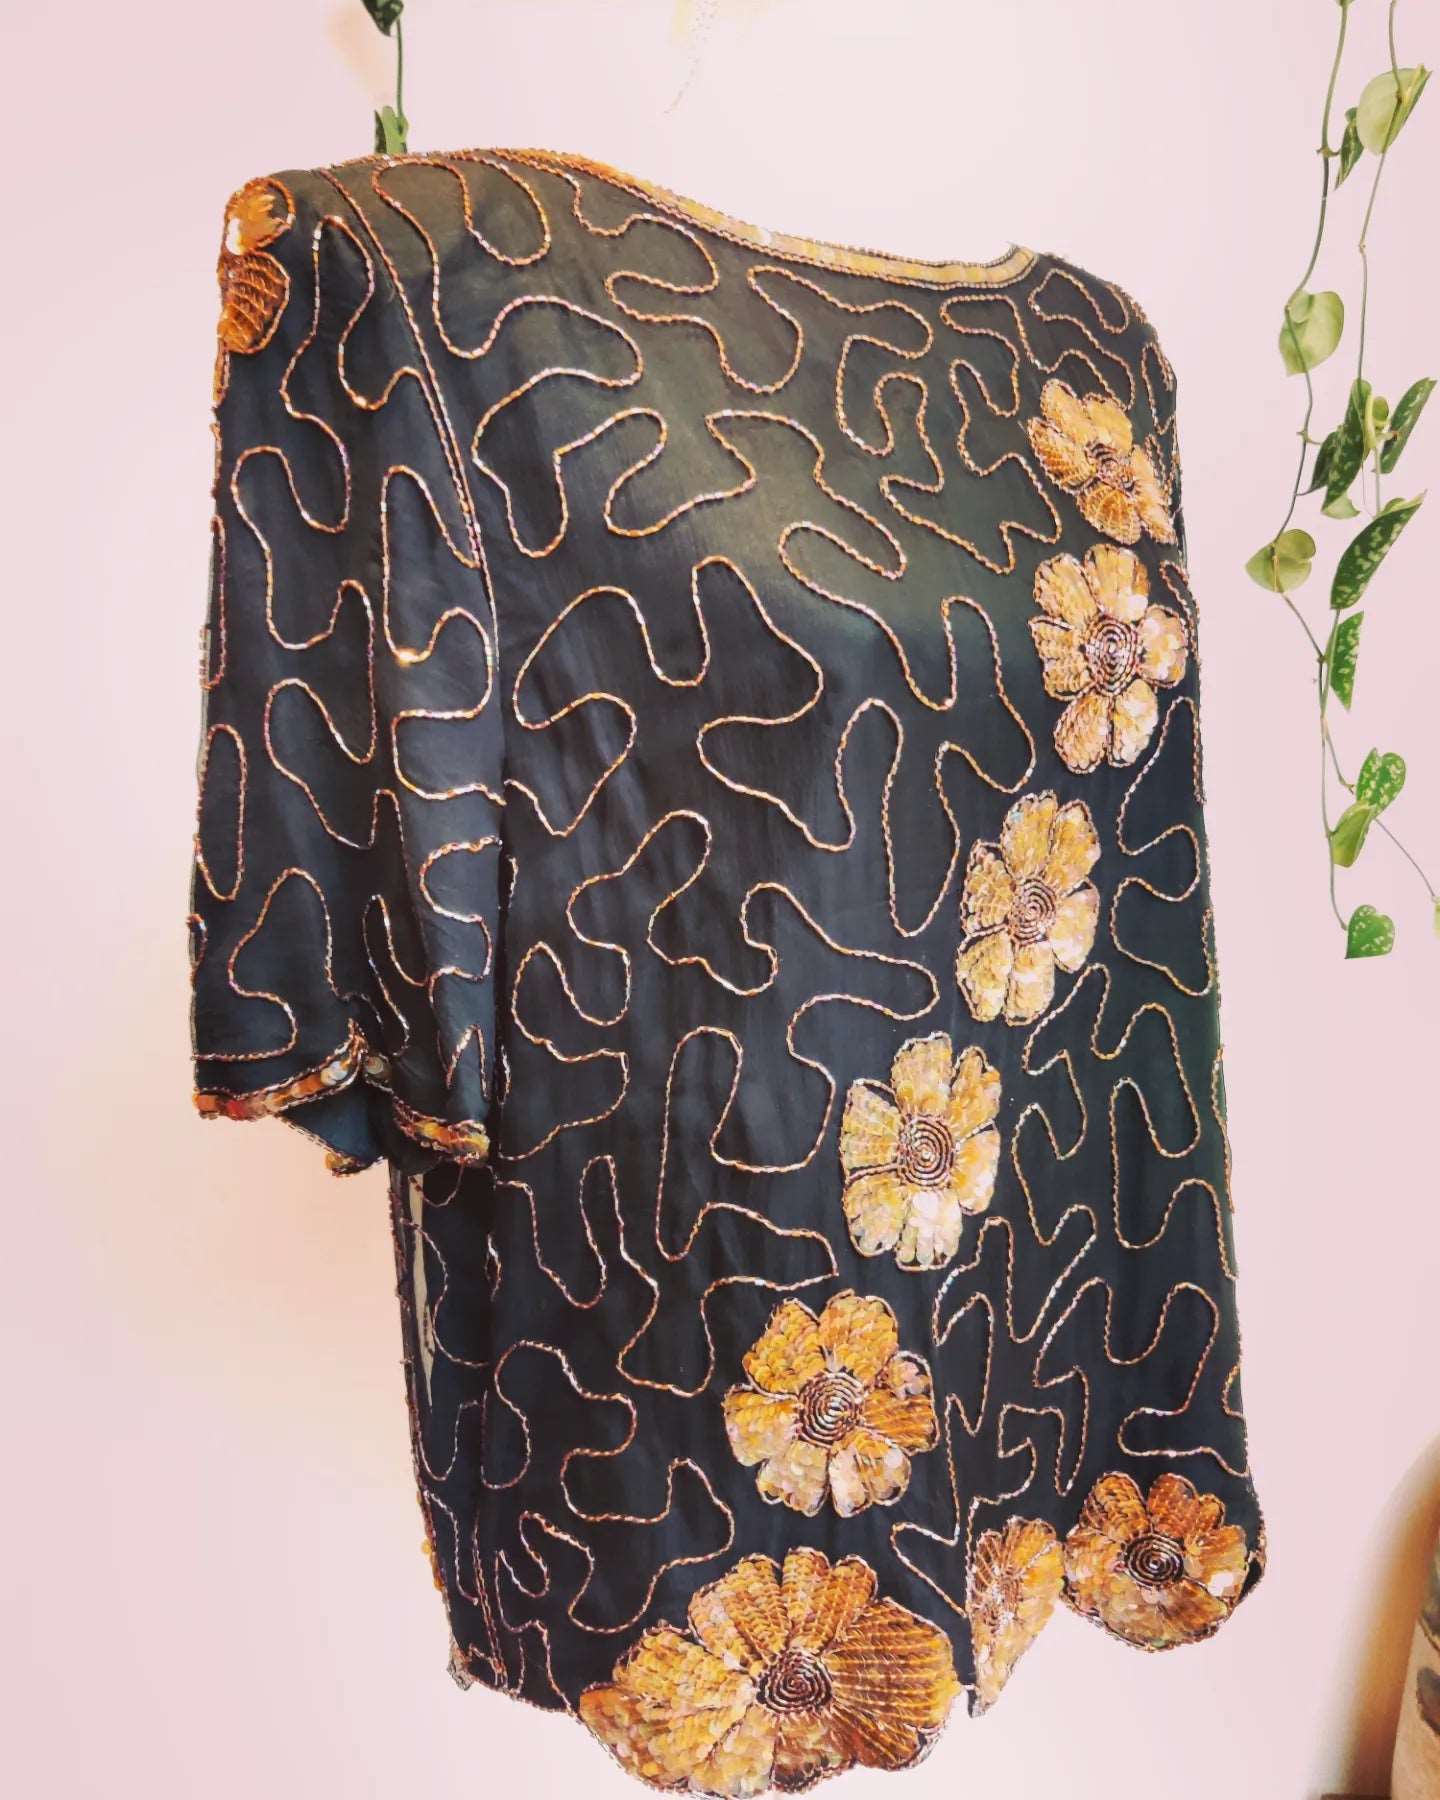 1980s Black and gold floral beaded top. Size 12-14.